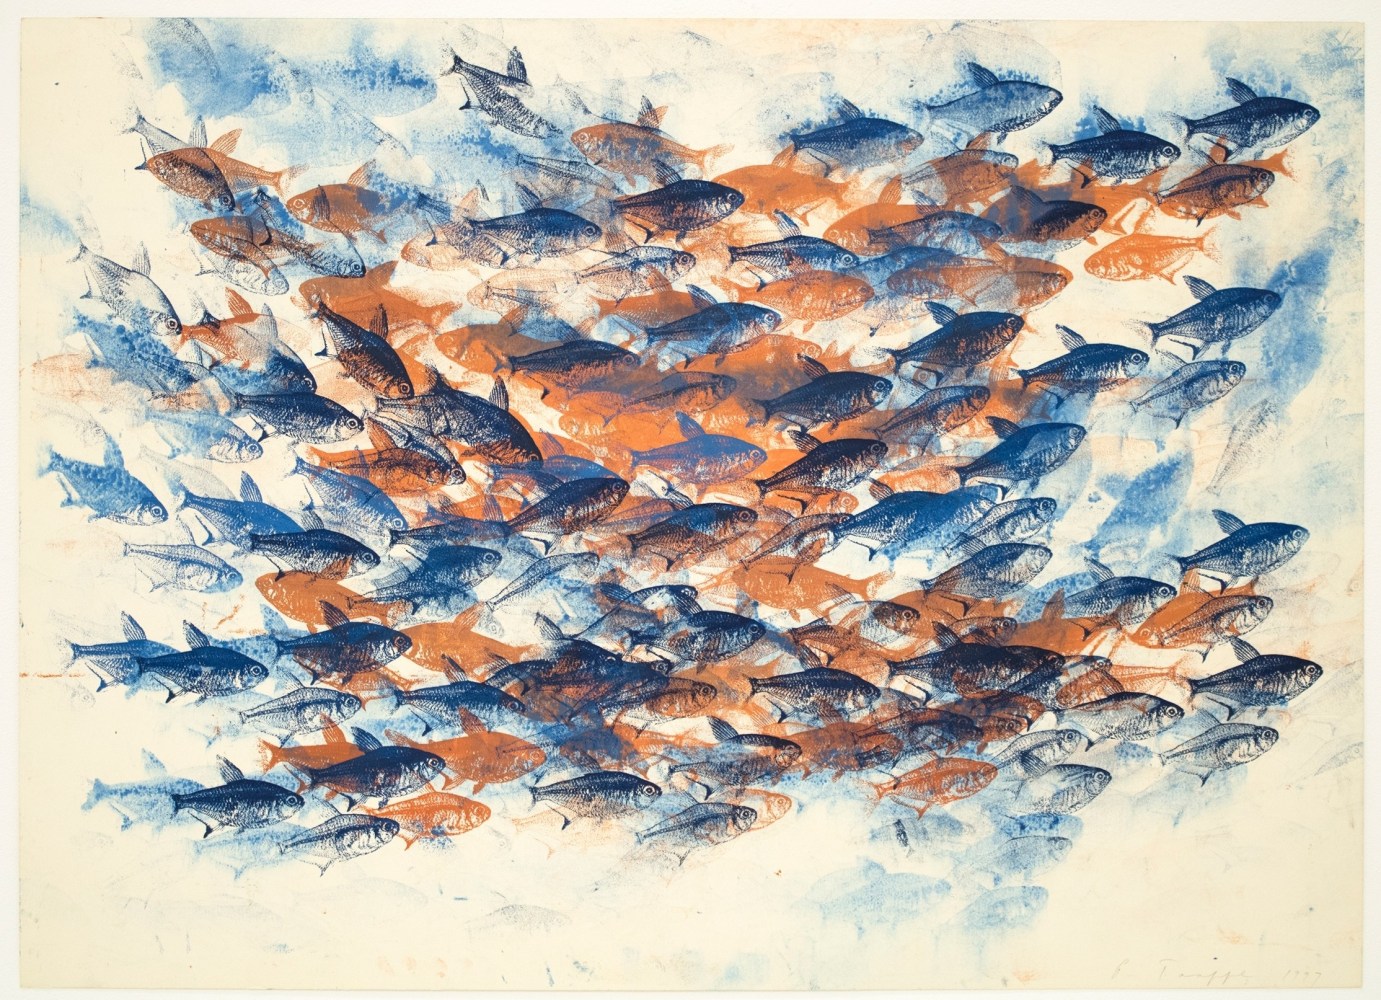 
Philip Taaffe

Untitled (School of Fish), 1997

Oil pigment on paper

19 3/4 x 27 1/2 inches (50.2 x 69.9 cm)